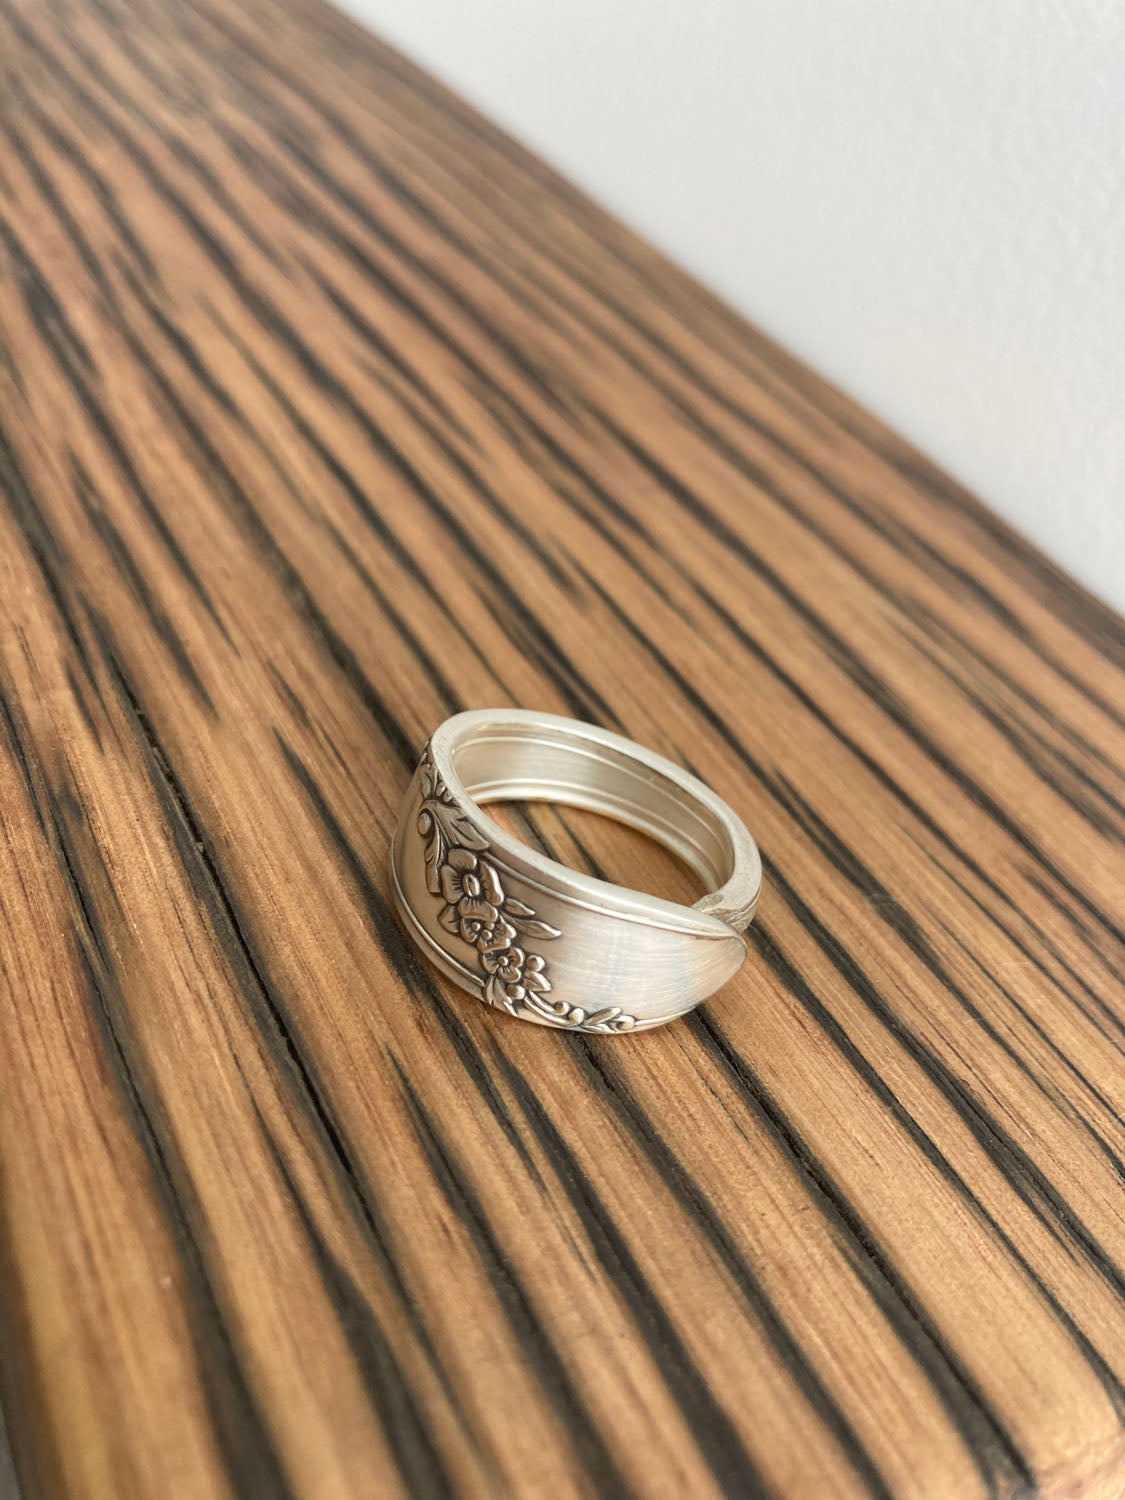 Spoon ring handcrafted